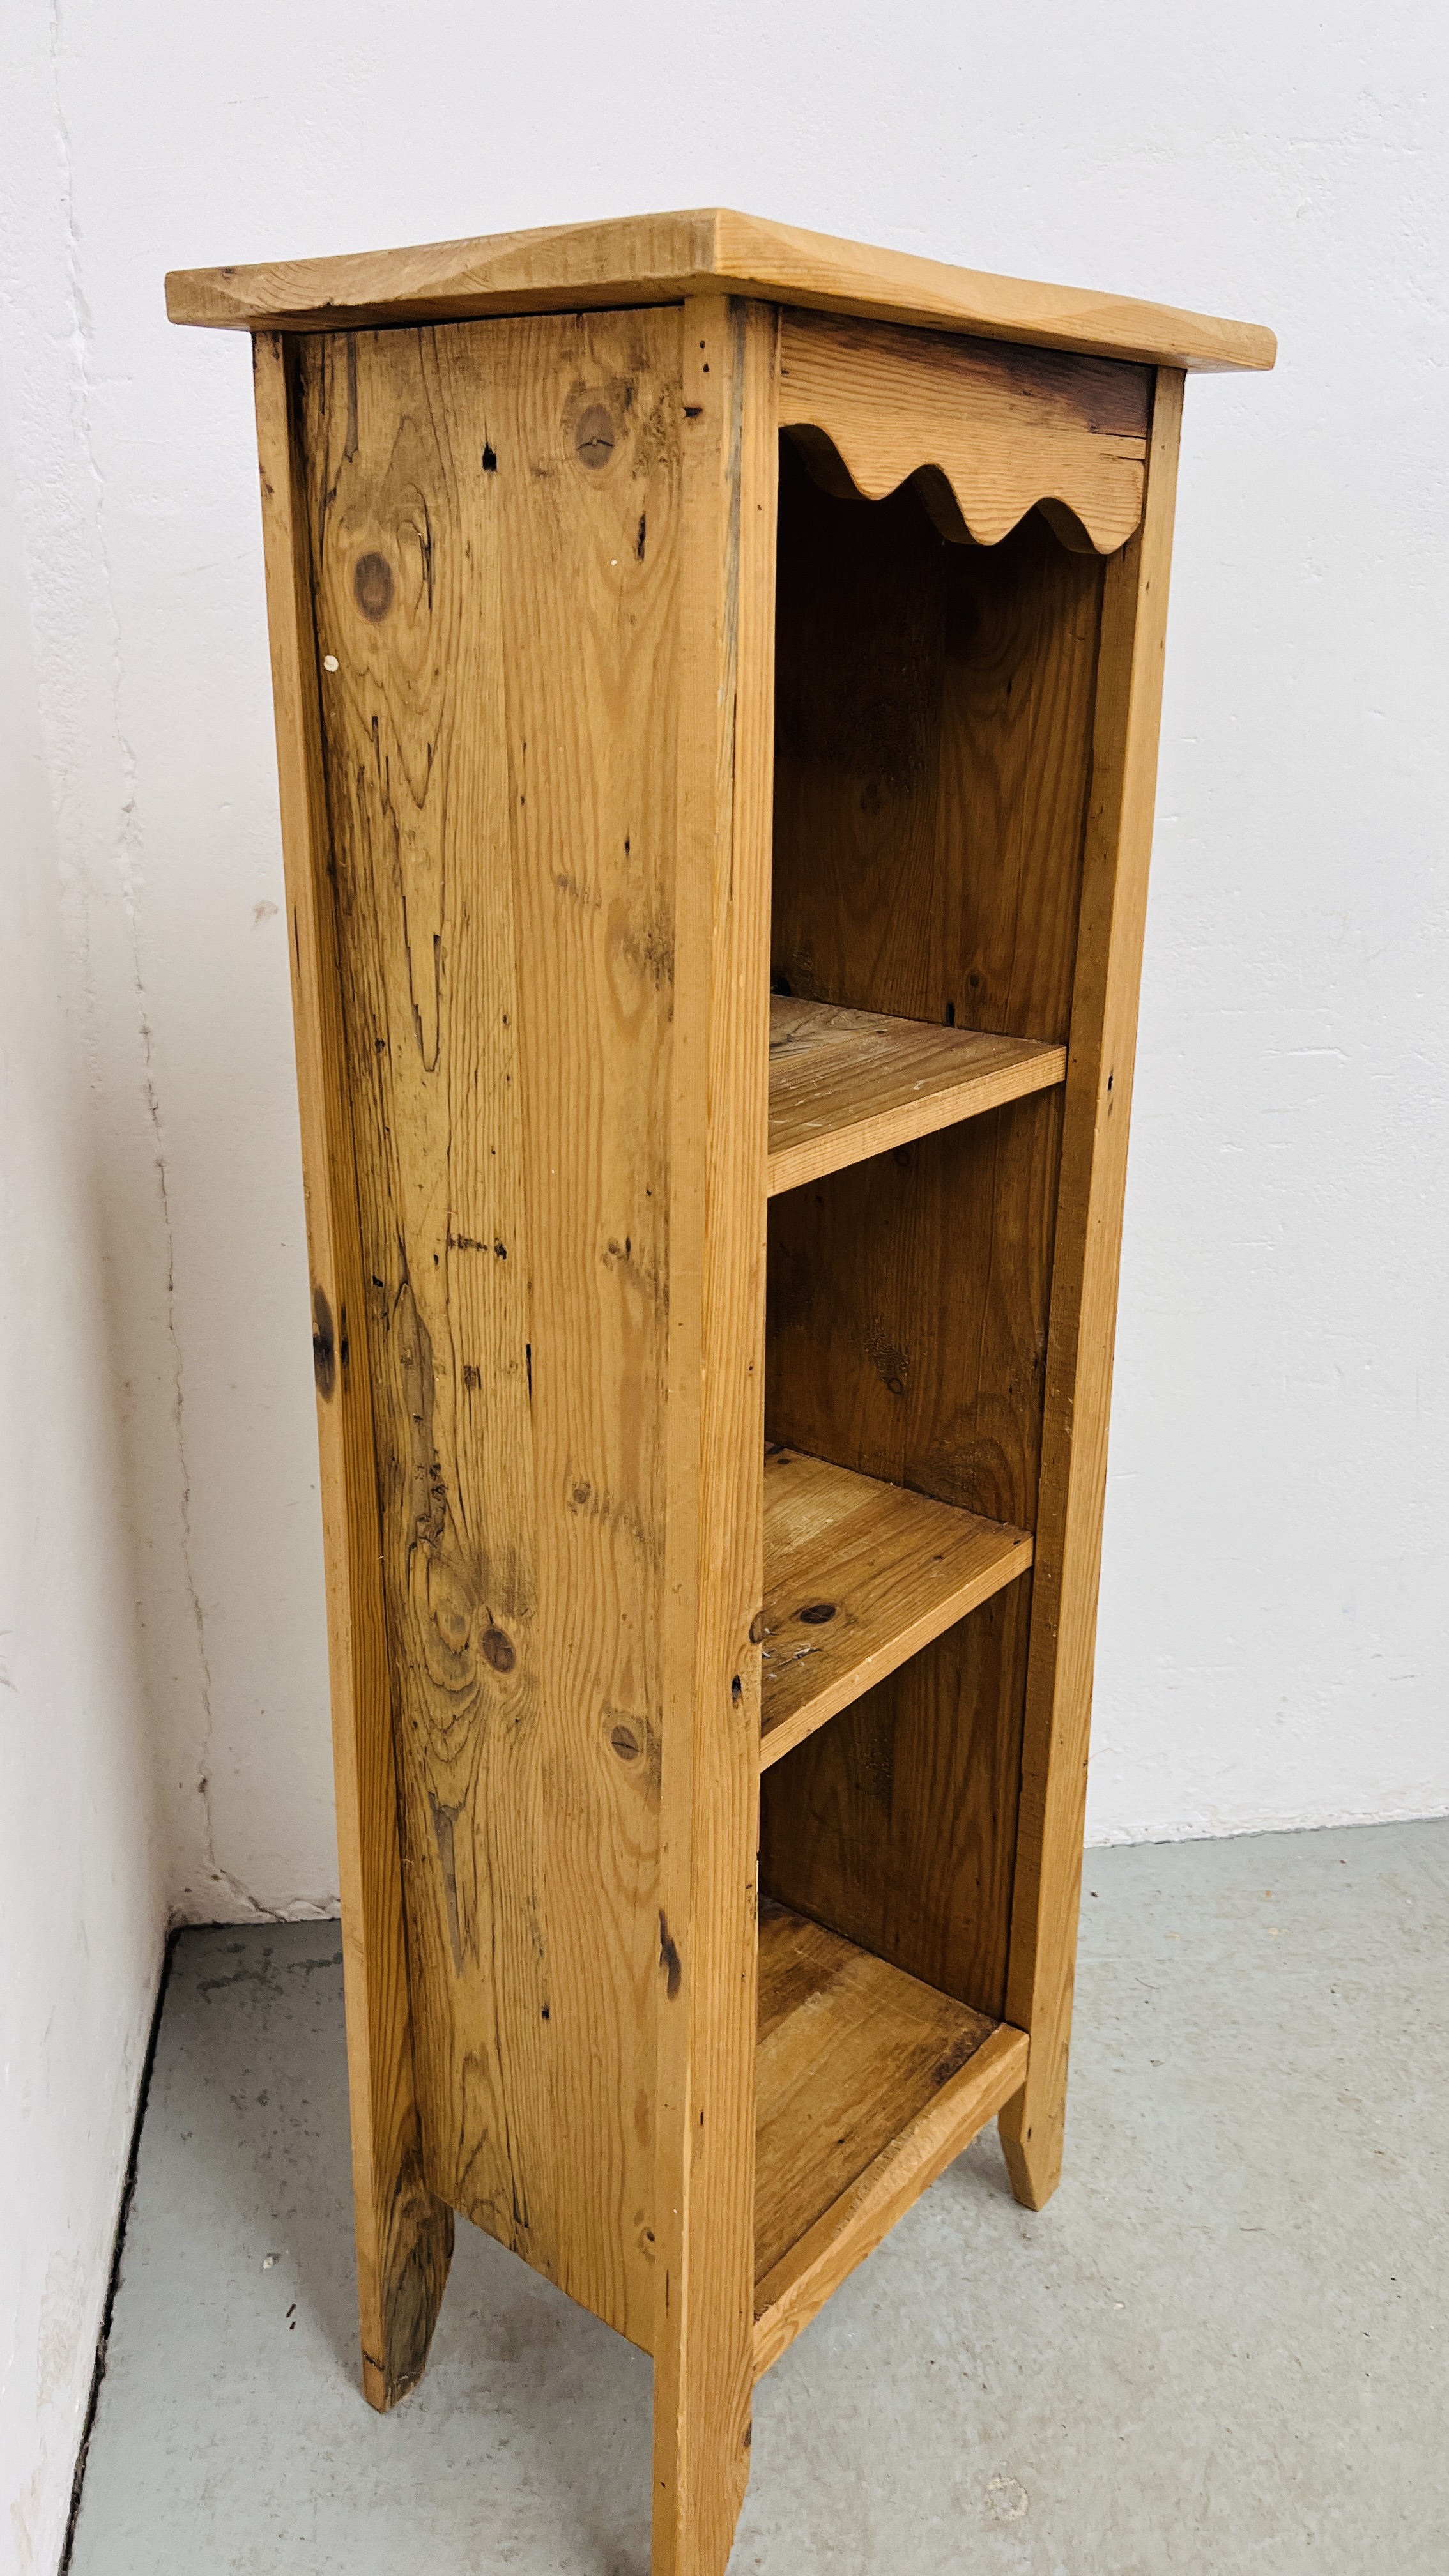 A 3 TIER RUSTIC PINE STAND H 123CM X D 29.5CM X W 44CM. - Image 6 of 7